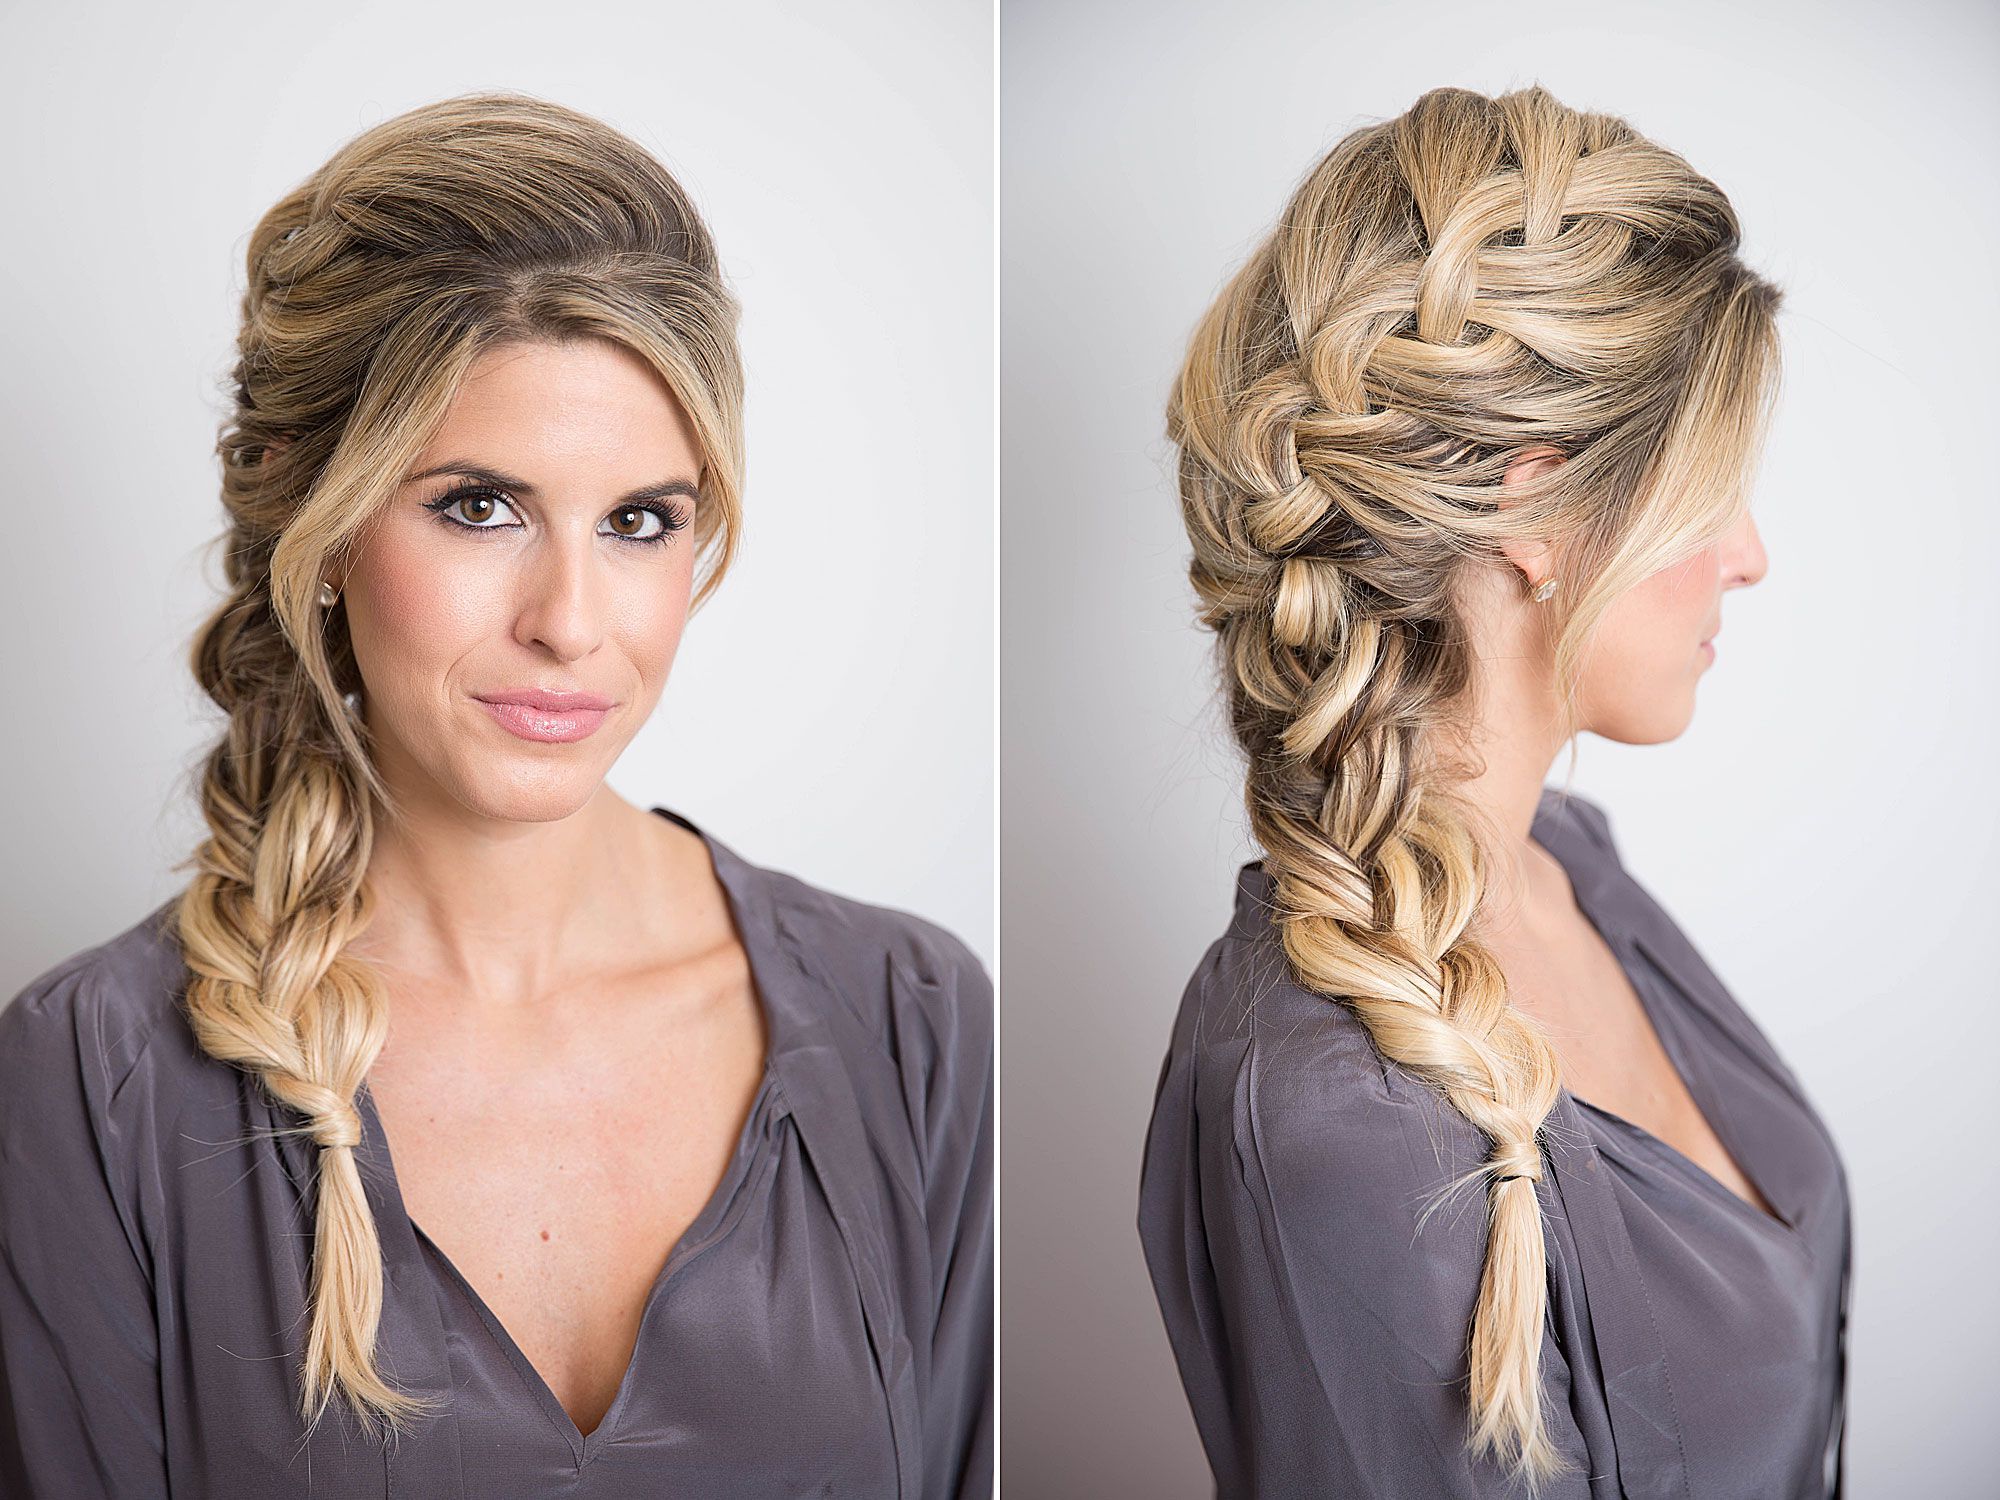 17 Braided Hairstyles With Gifs – How To Do Every Type Of Braid Within Preferred Dramatic Rope Twisted Braid Hairstyles (View 7 of 20)